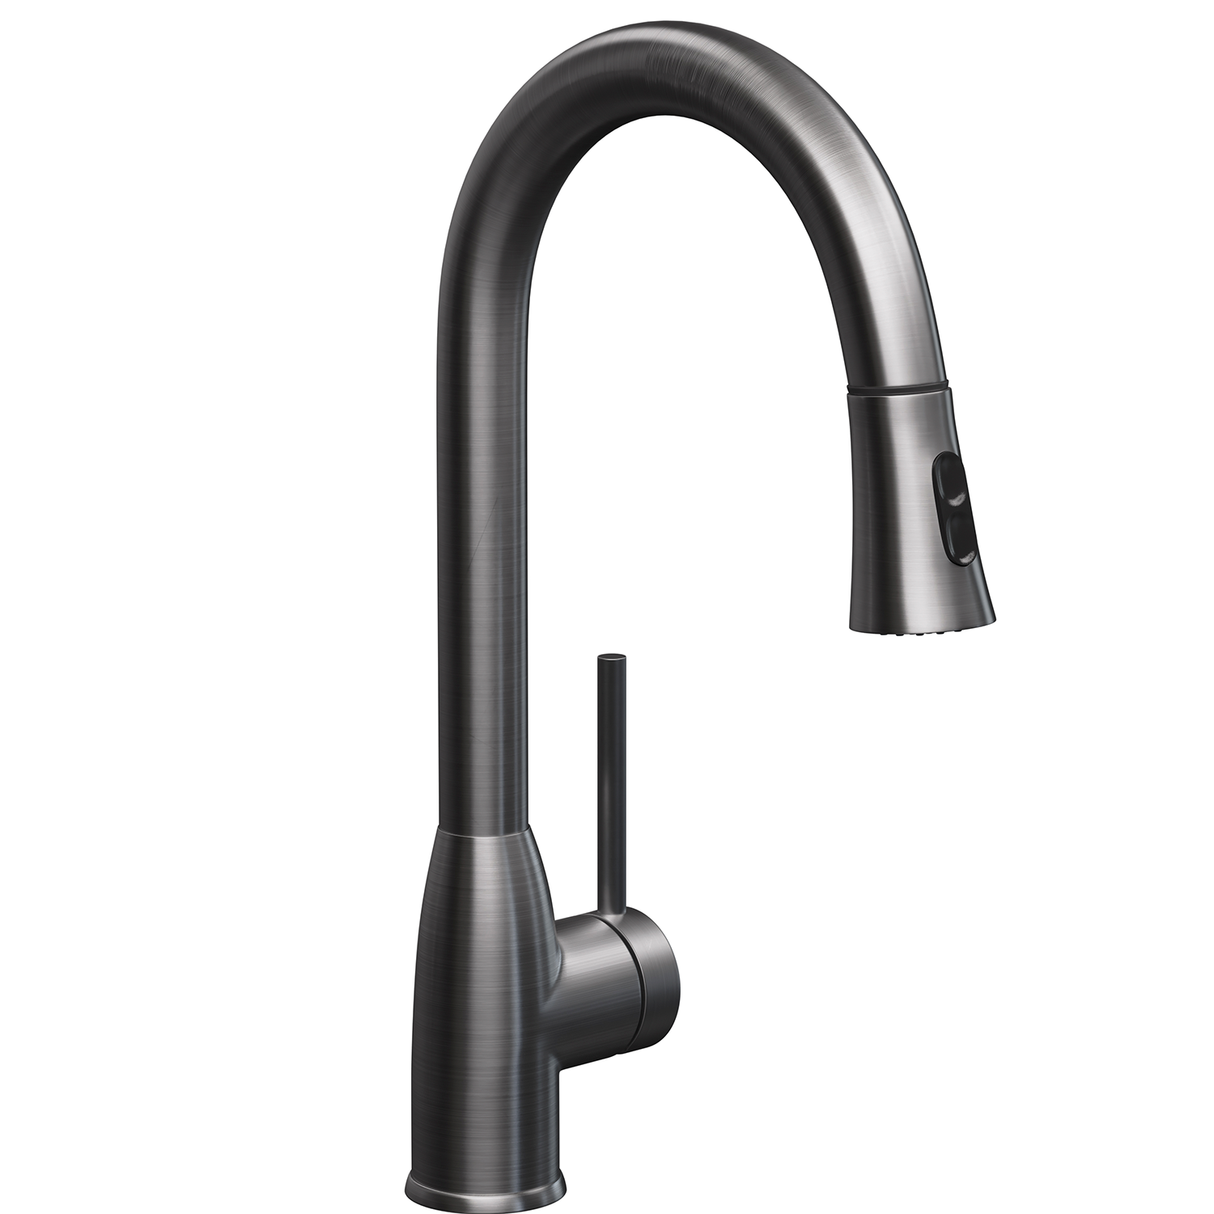 DAX Brass Single Handle Pull Down Kitchen Faucet with Dual Sprayer, Nickel DAX-8887